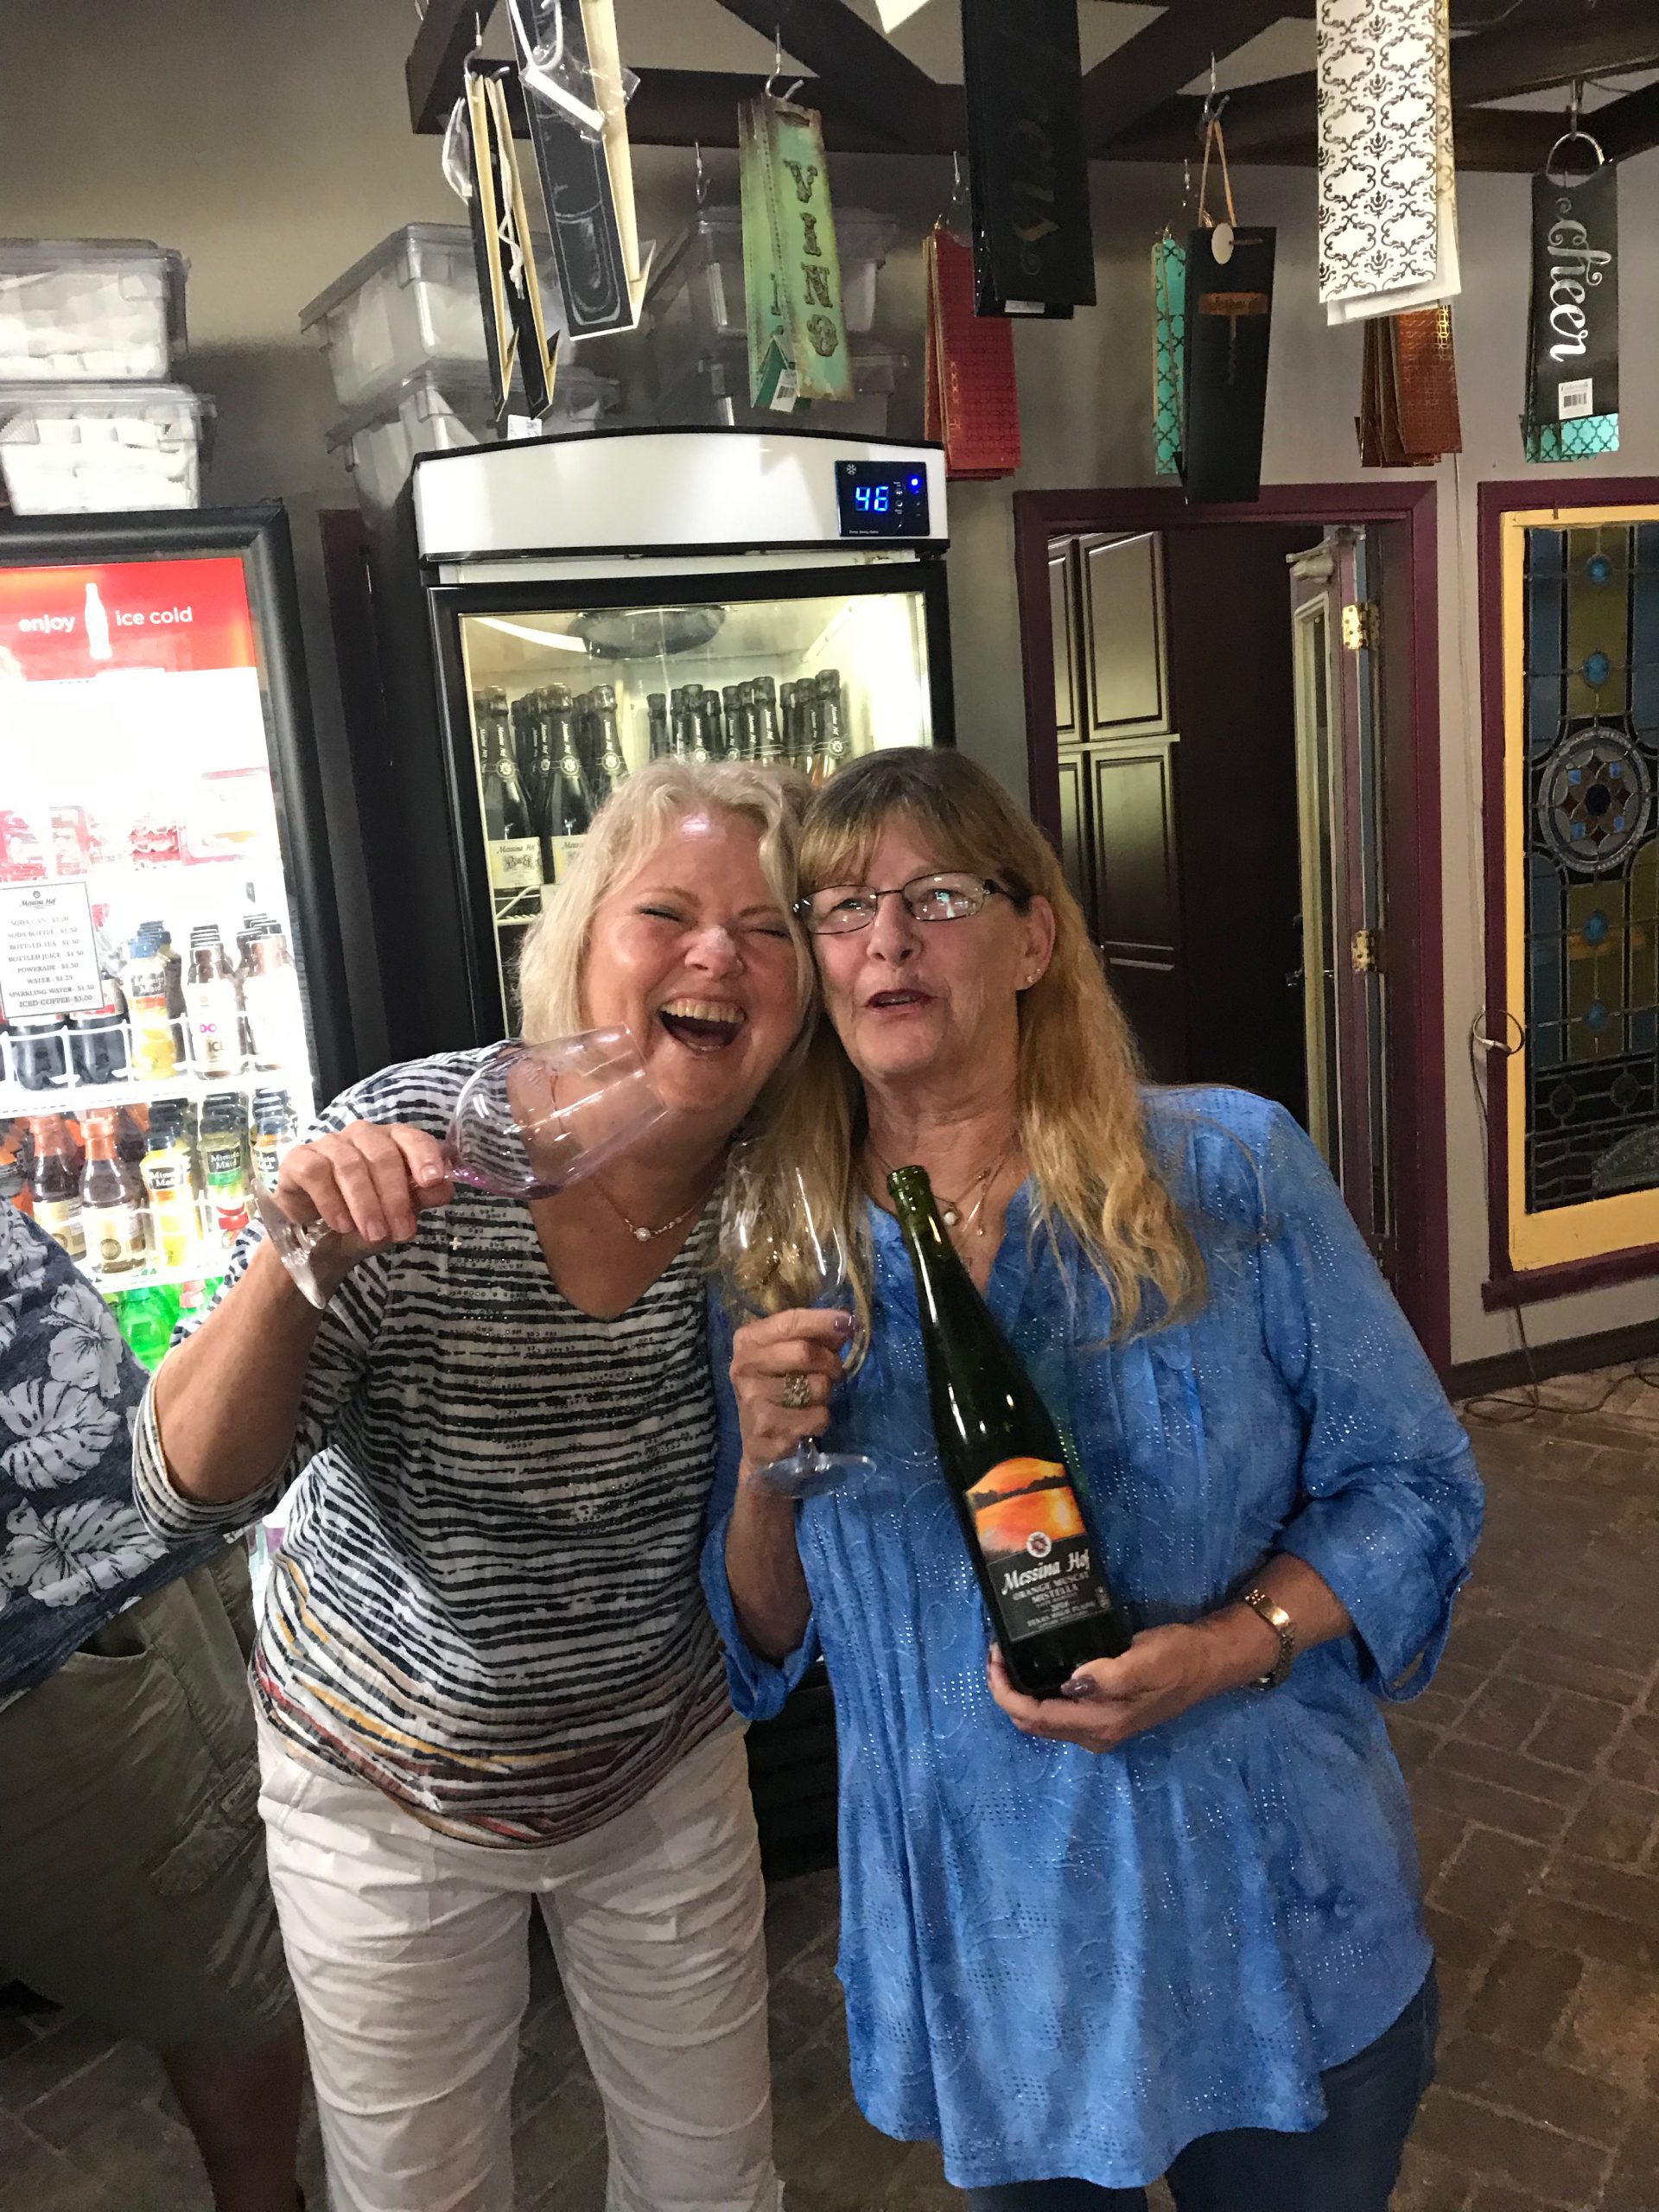 Rhonda and Lanore at Messina Hof and The Real Golden Girls is a lifestyle site for mature folks who like to have fun and save money while living their best life together